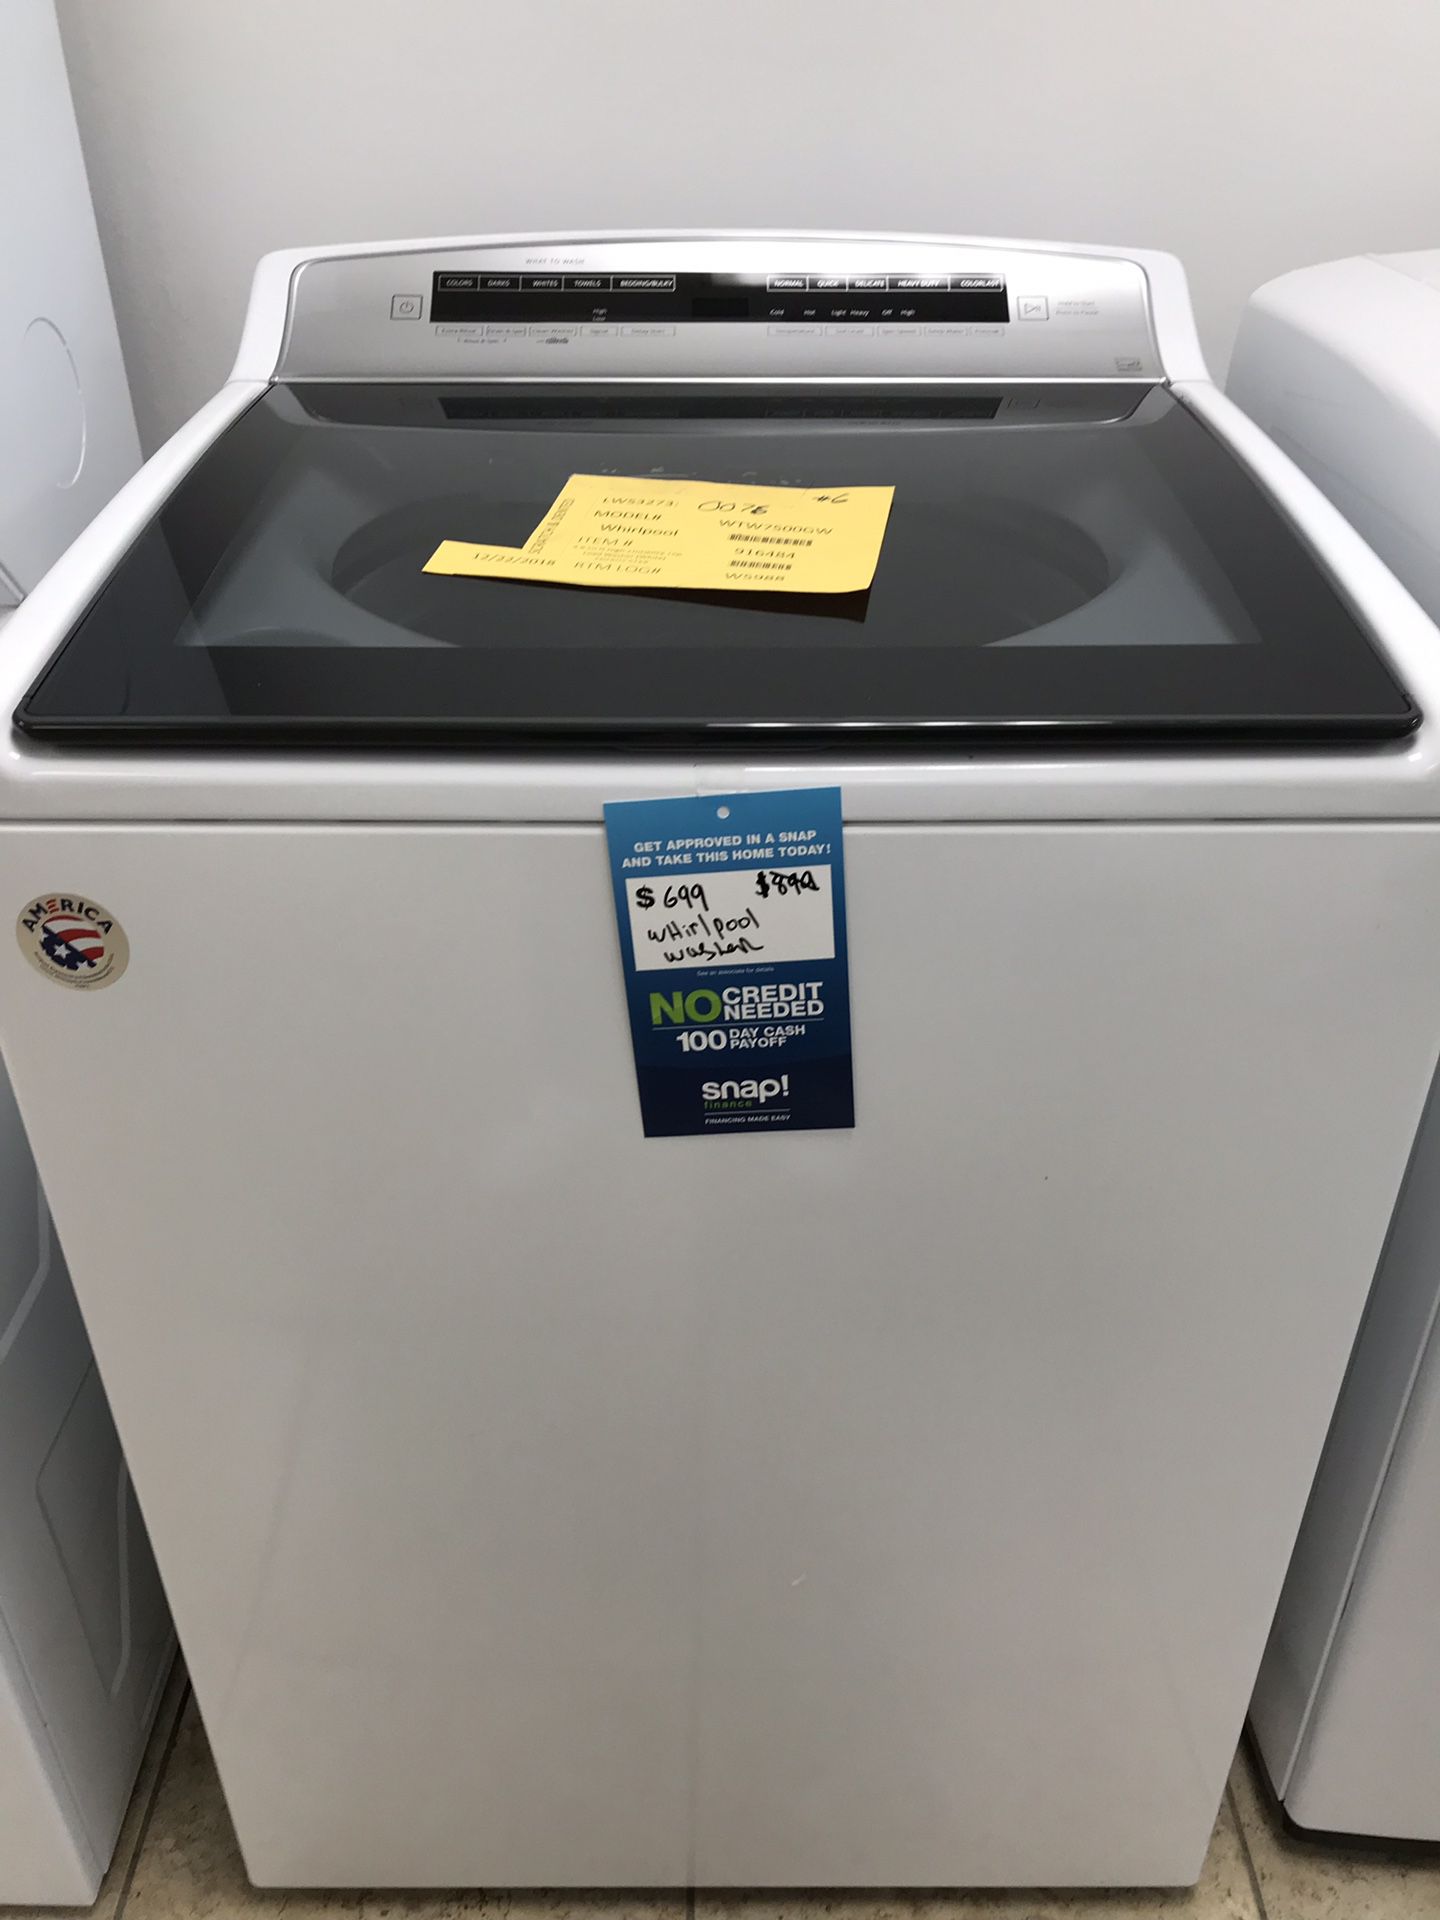 Whirlpool 4.8 cu. ft. HIGH-EFFICIENCY Whit Top Load Washer Full one year warranty take home for $39 down